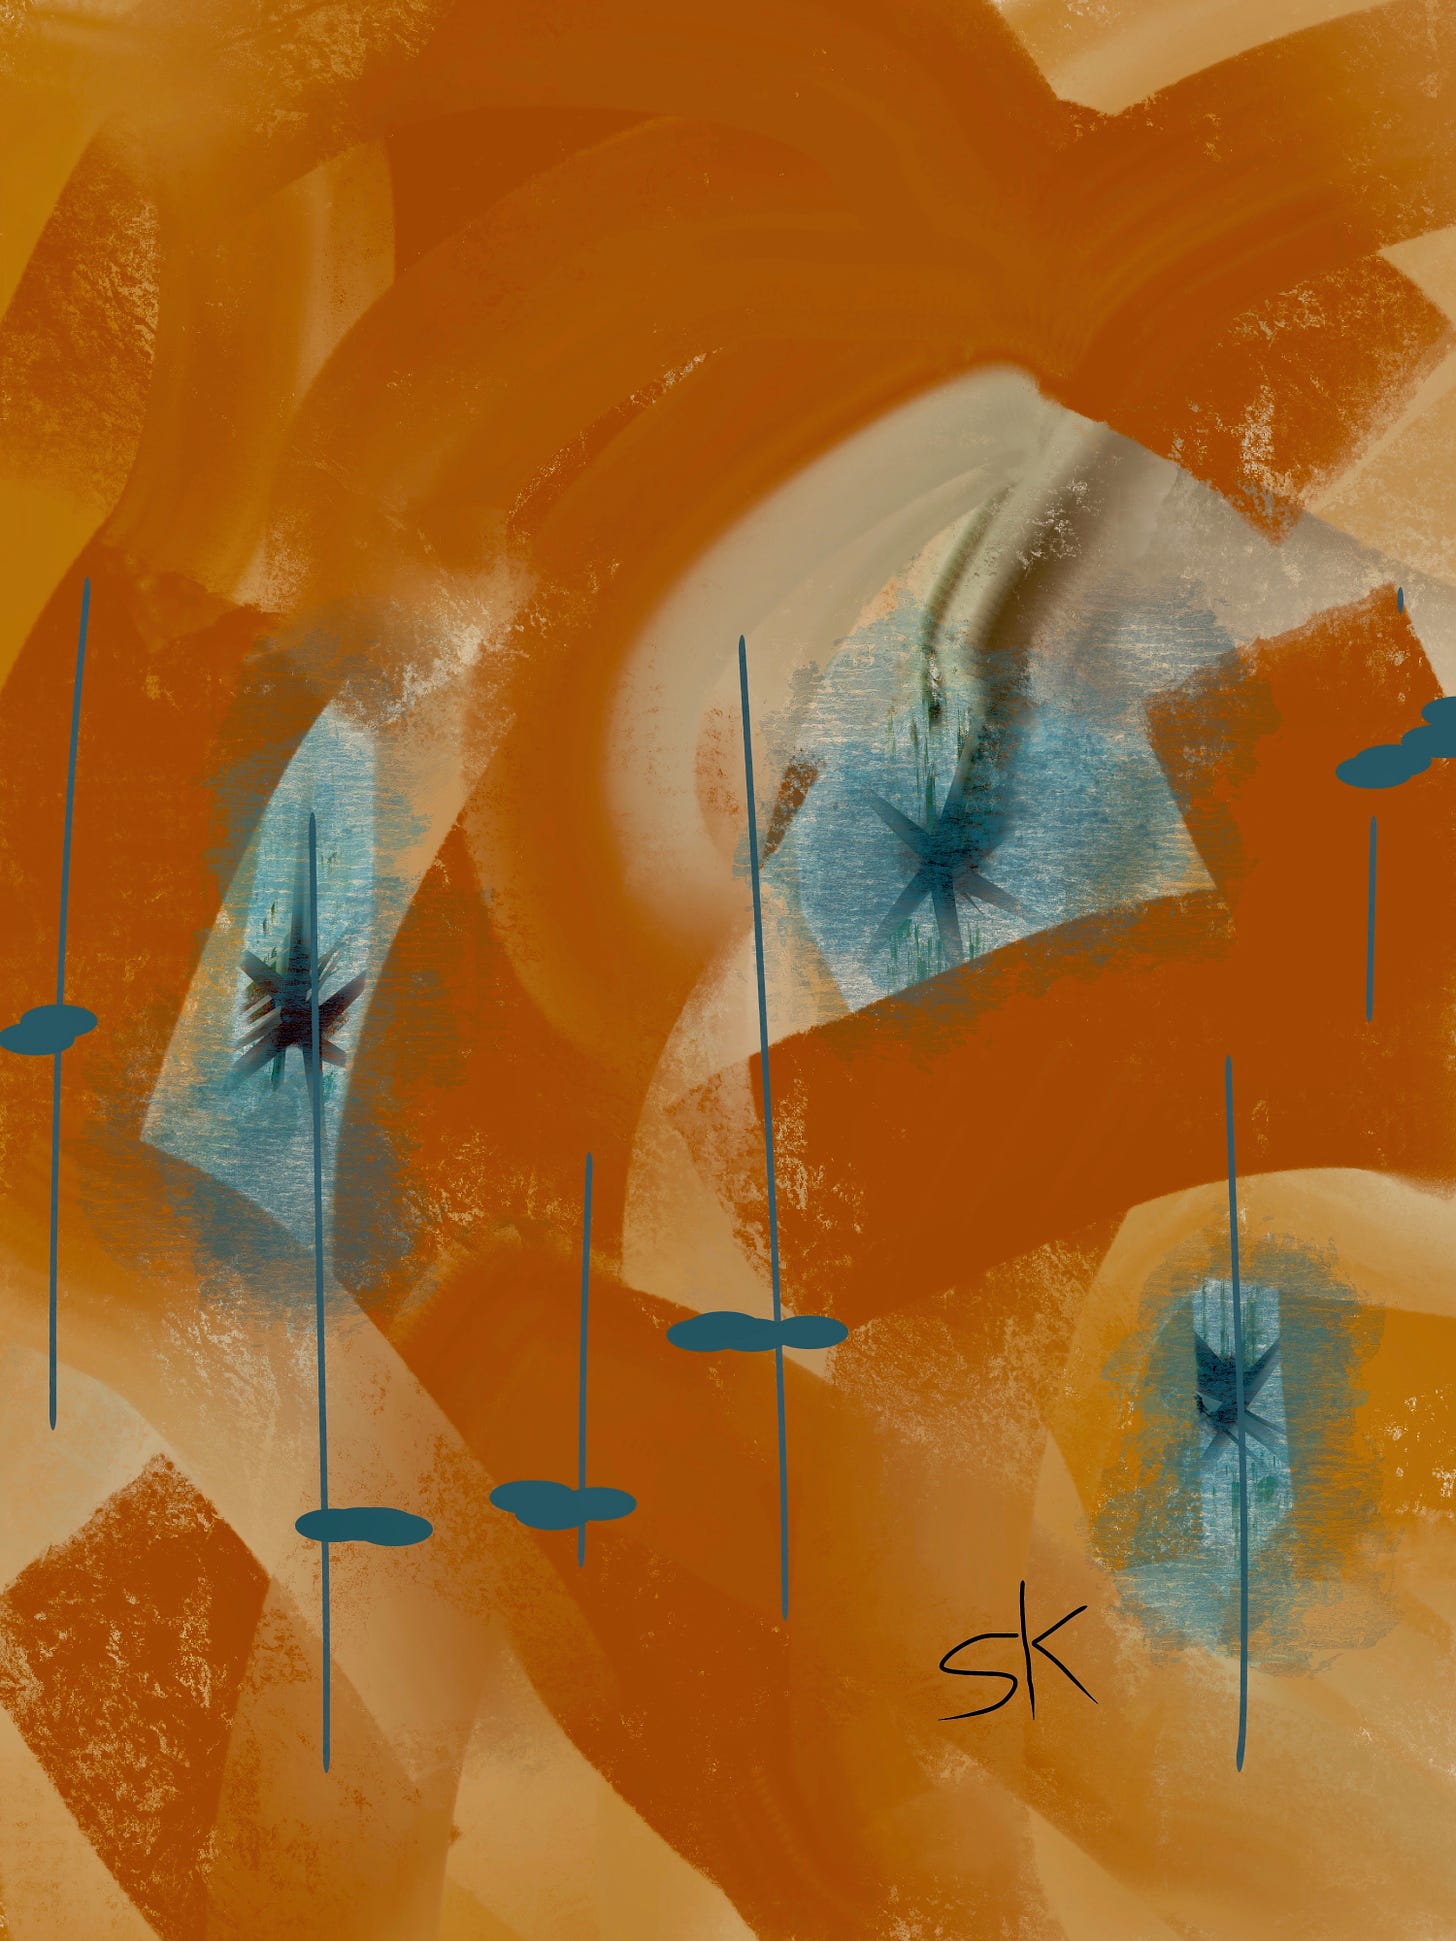 Abstract painting by Sherry Killam Arts with light blue flag shapes floating in a sea of caramel.